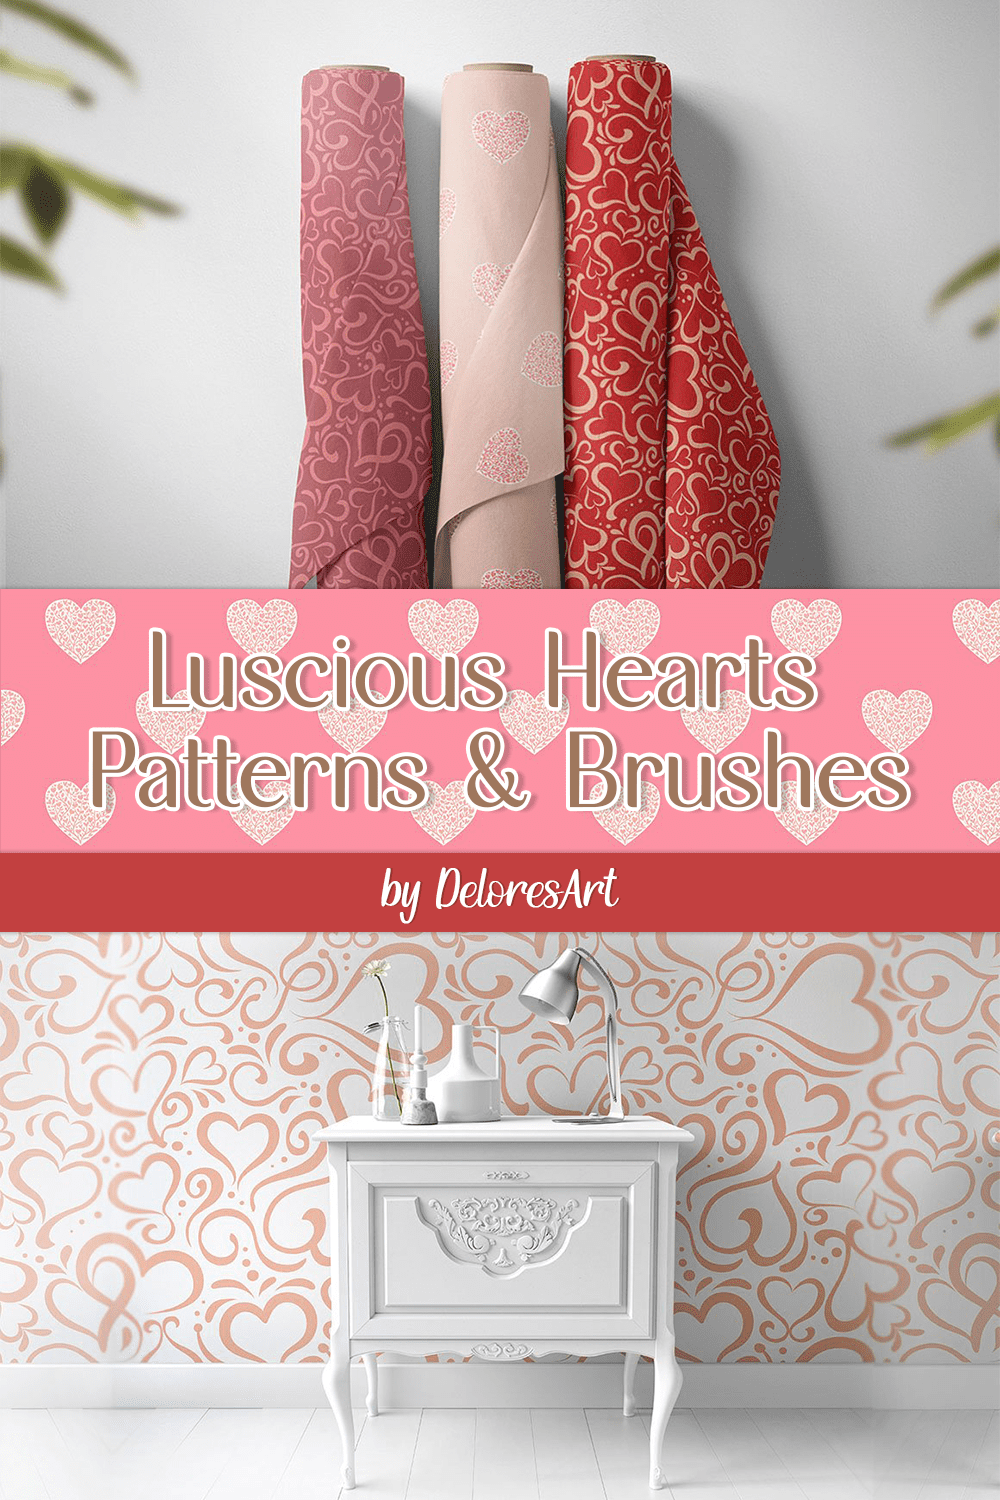 luscious hearts patterns brushes pinterest 894